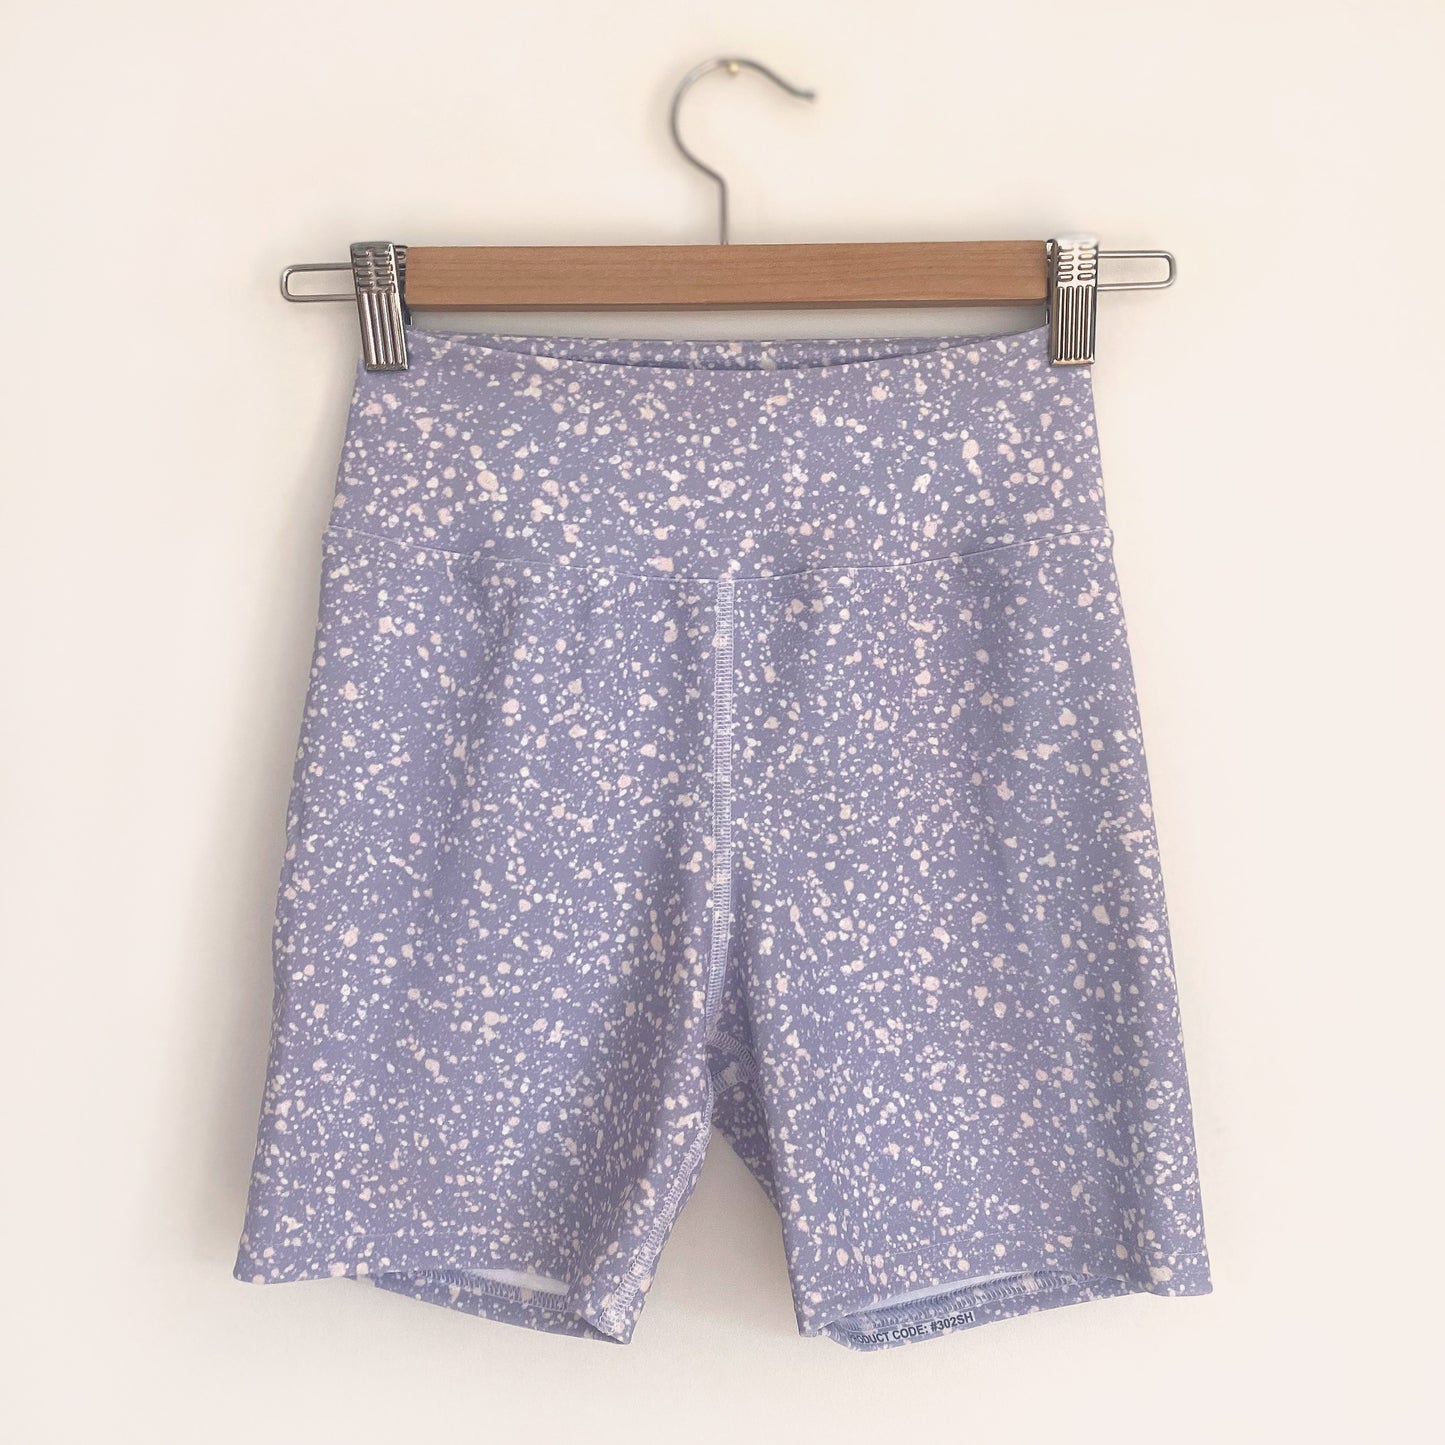 Micro Spot High Waisted Biker Shorts in Lavender